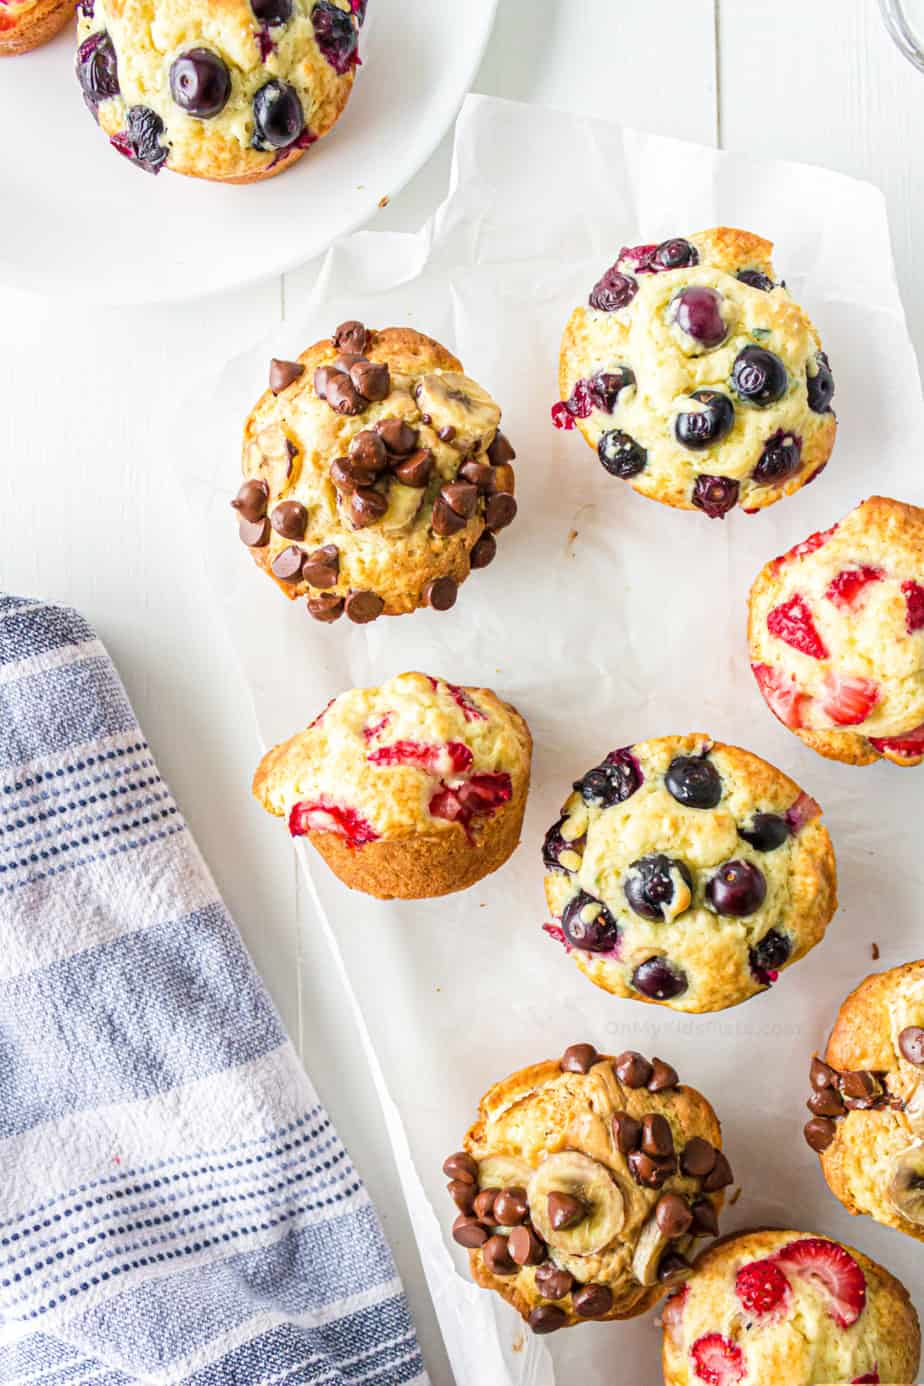 Strawberry, chocolate chip banana and blueberry muffins on parchment paper to serve.